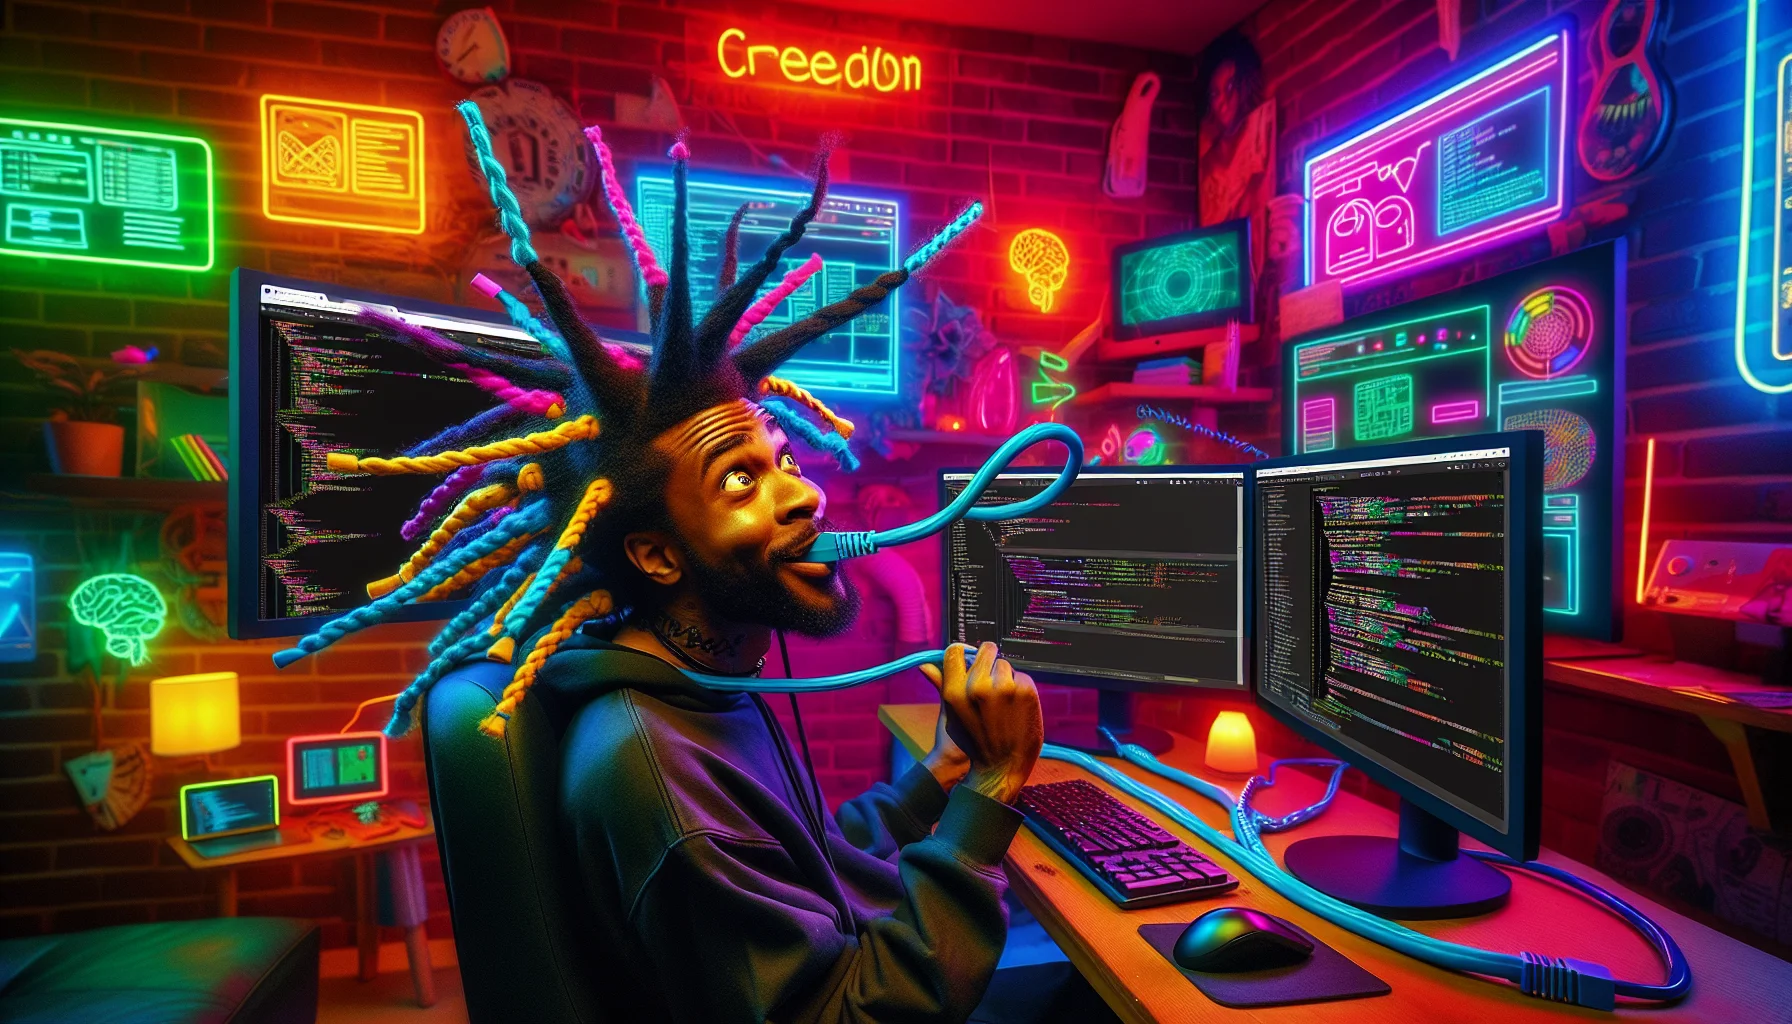 Generate a detailed and intimate image capturing a hilarious scenario. Picture a Black male with Wix locs, exuding endless creativity, sitting in a cozy room filled with funky, vibrant neon-colored tech gadgets. He's earnestly engaged in web hosting, with multiple monitors displaying codes, websites, and diagrams in an array of colors. Meanwhile, his Wix locs are playfully entangled with an ethernet cable, symbolizing his connection to the digital realm. Place emphasis on his amused expression, the dynamic vibrant environment, and the fun connection between his hairstyle and the work he is doing.